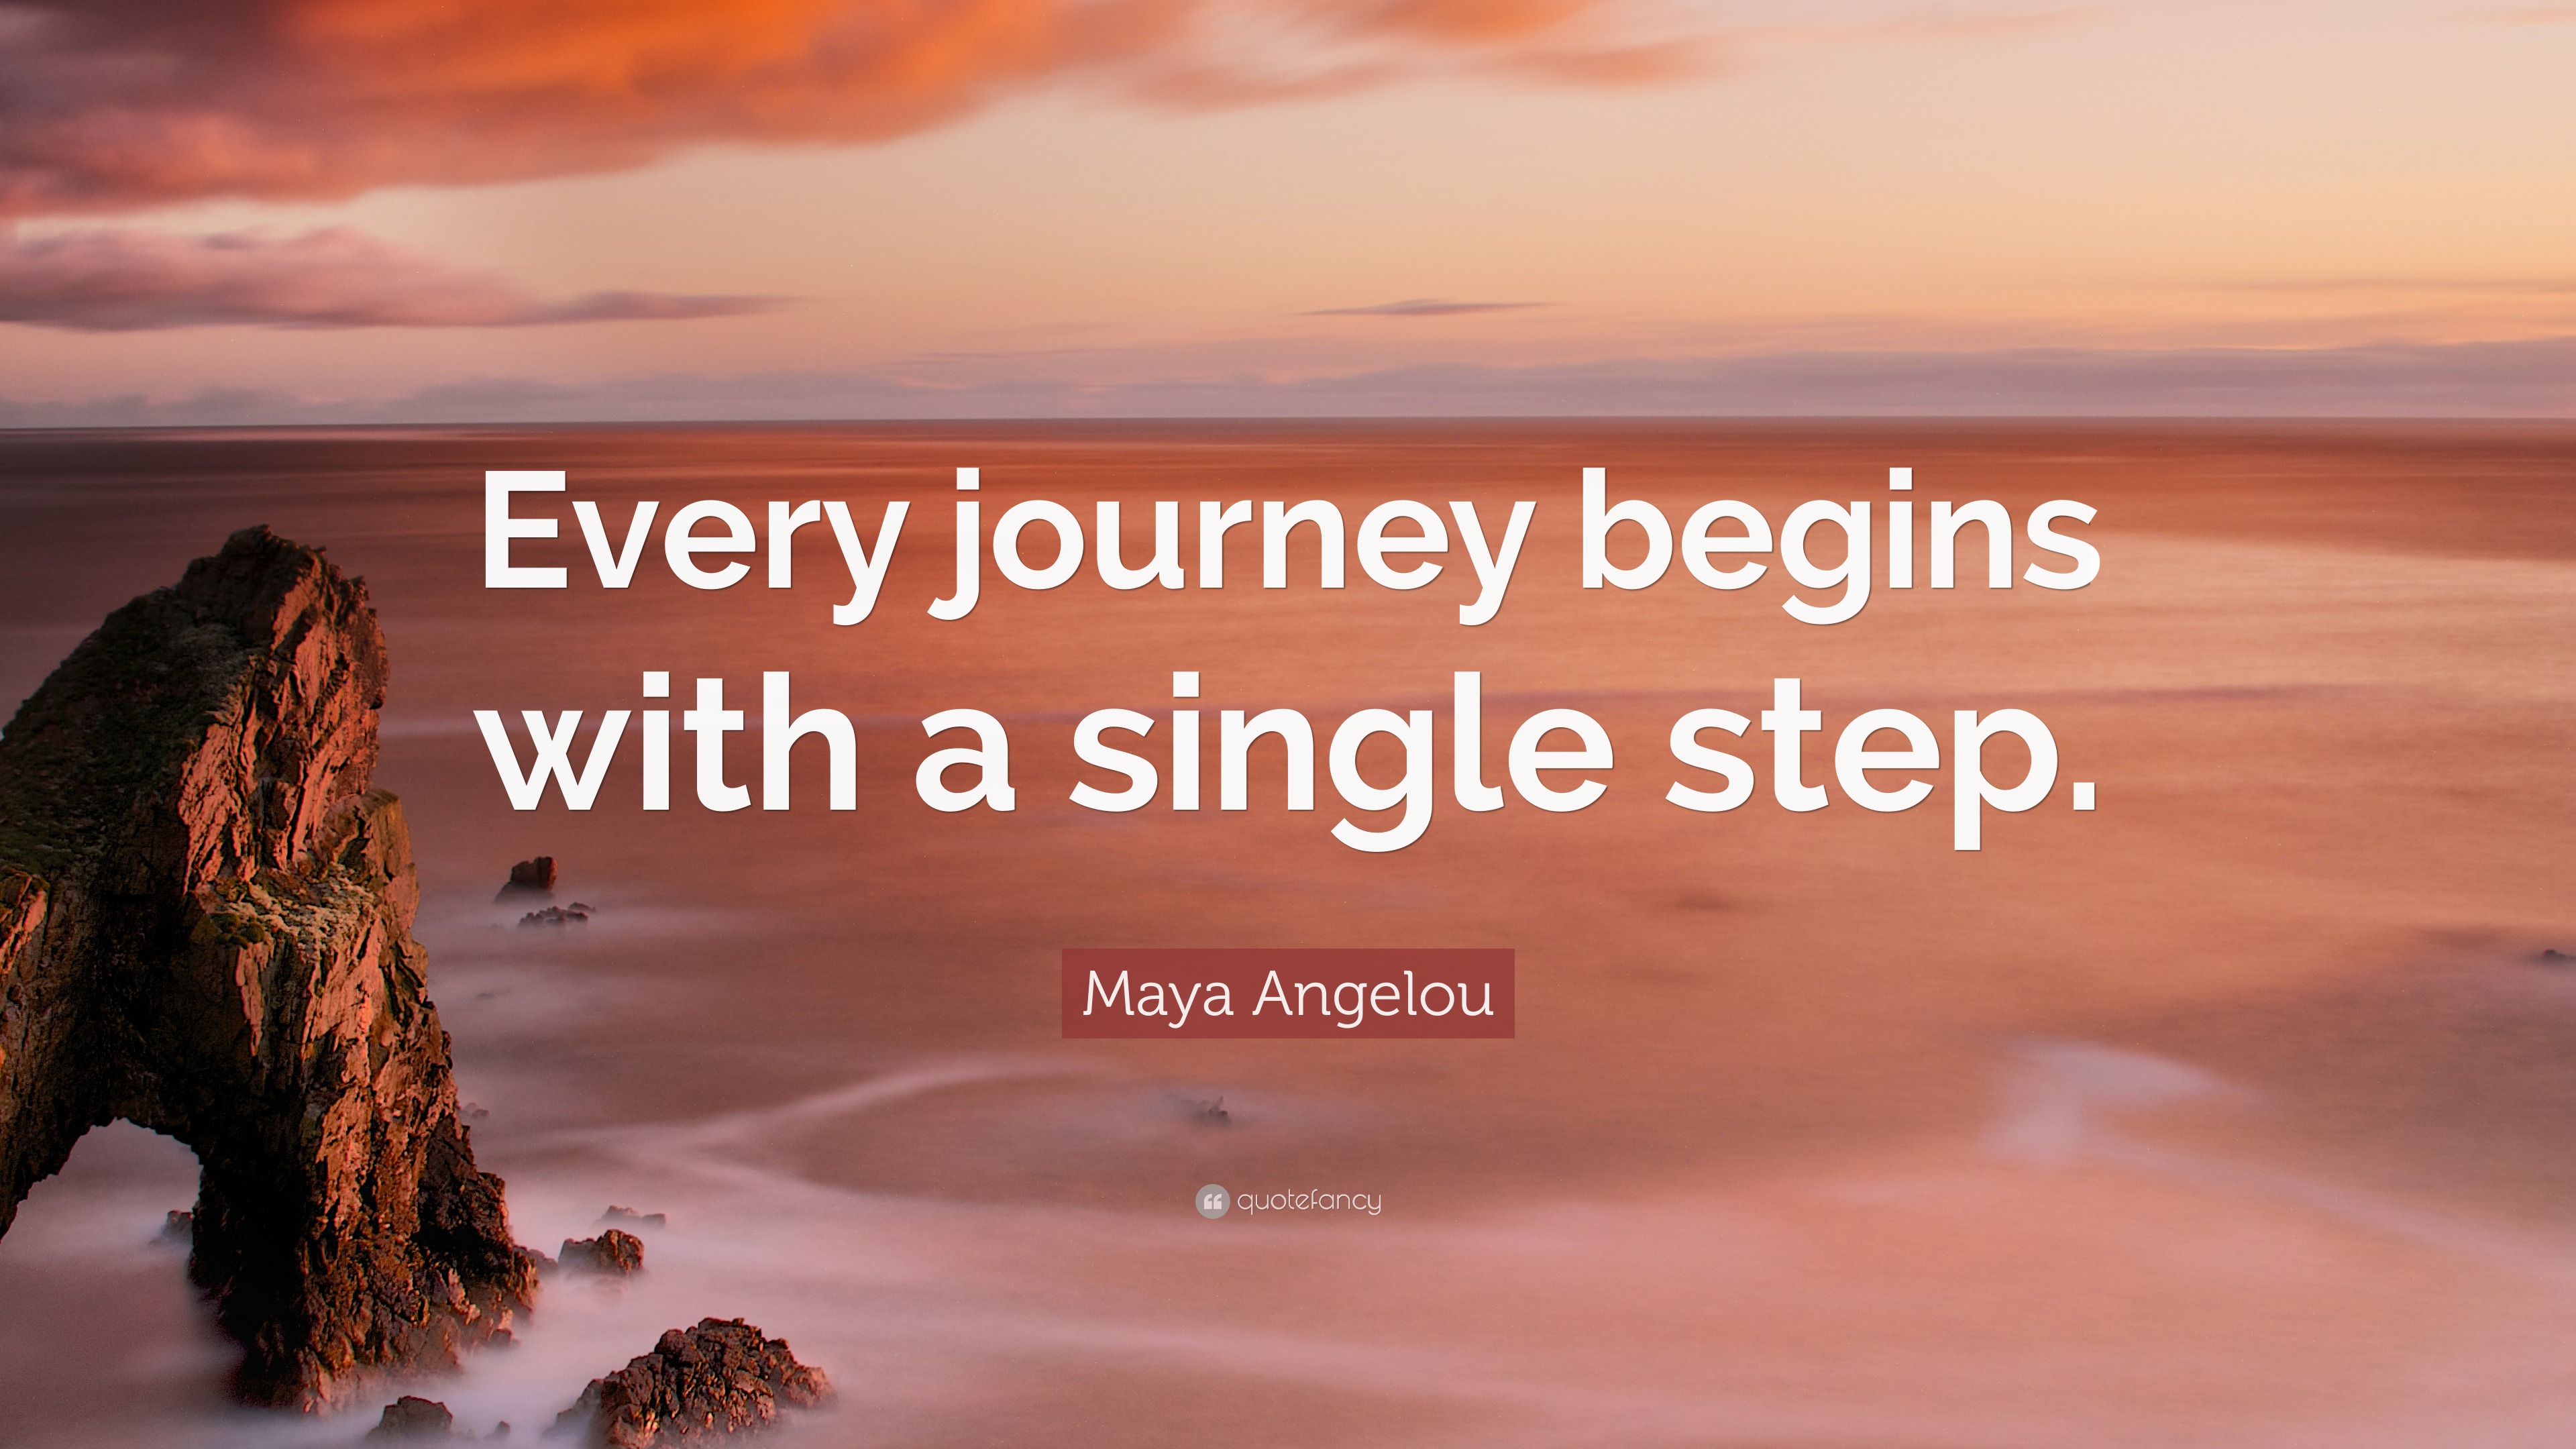 long journey begins with a single step